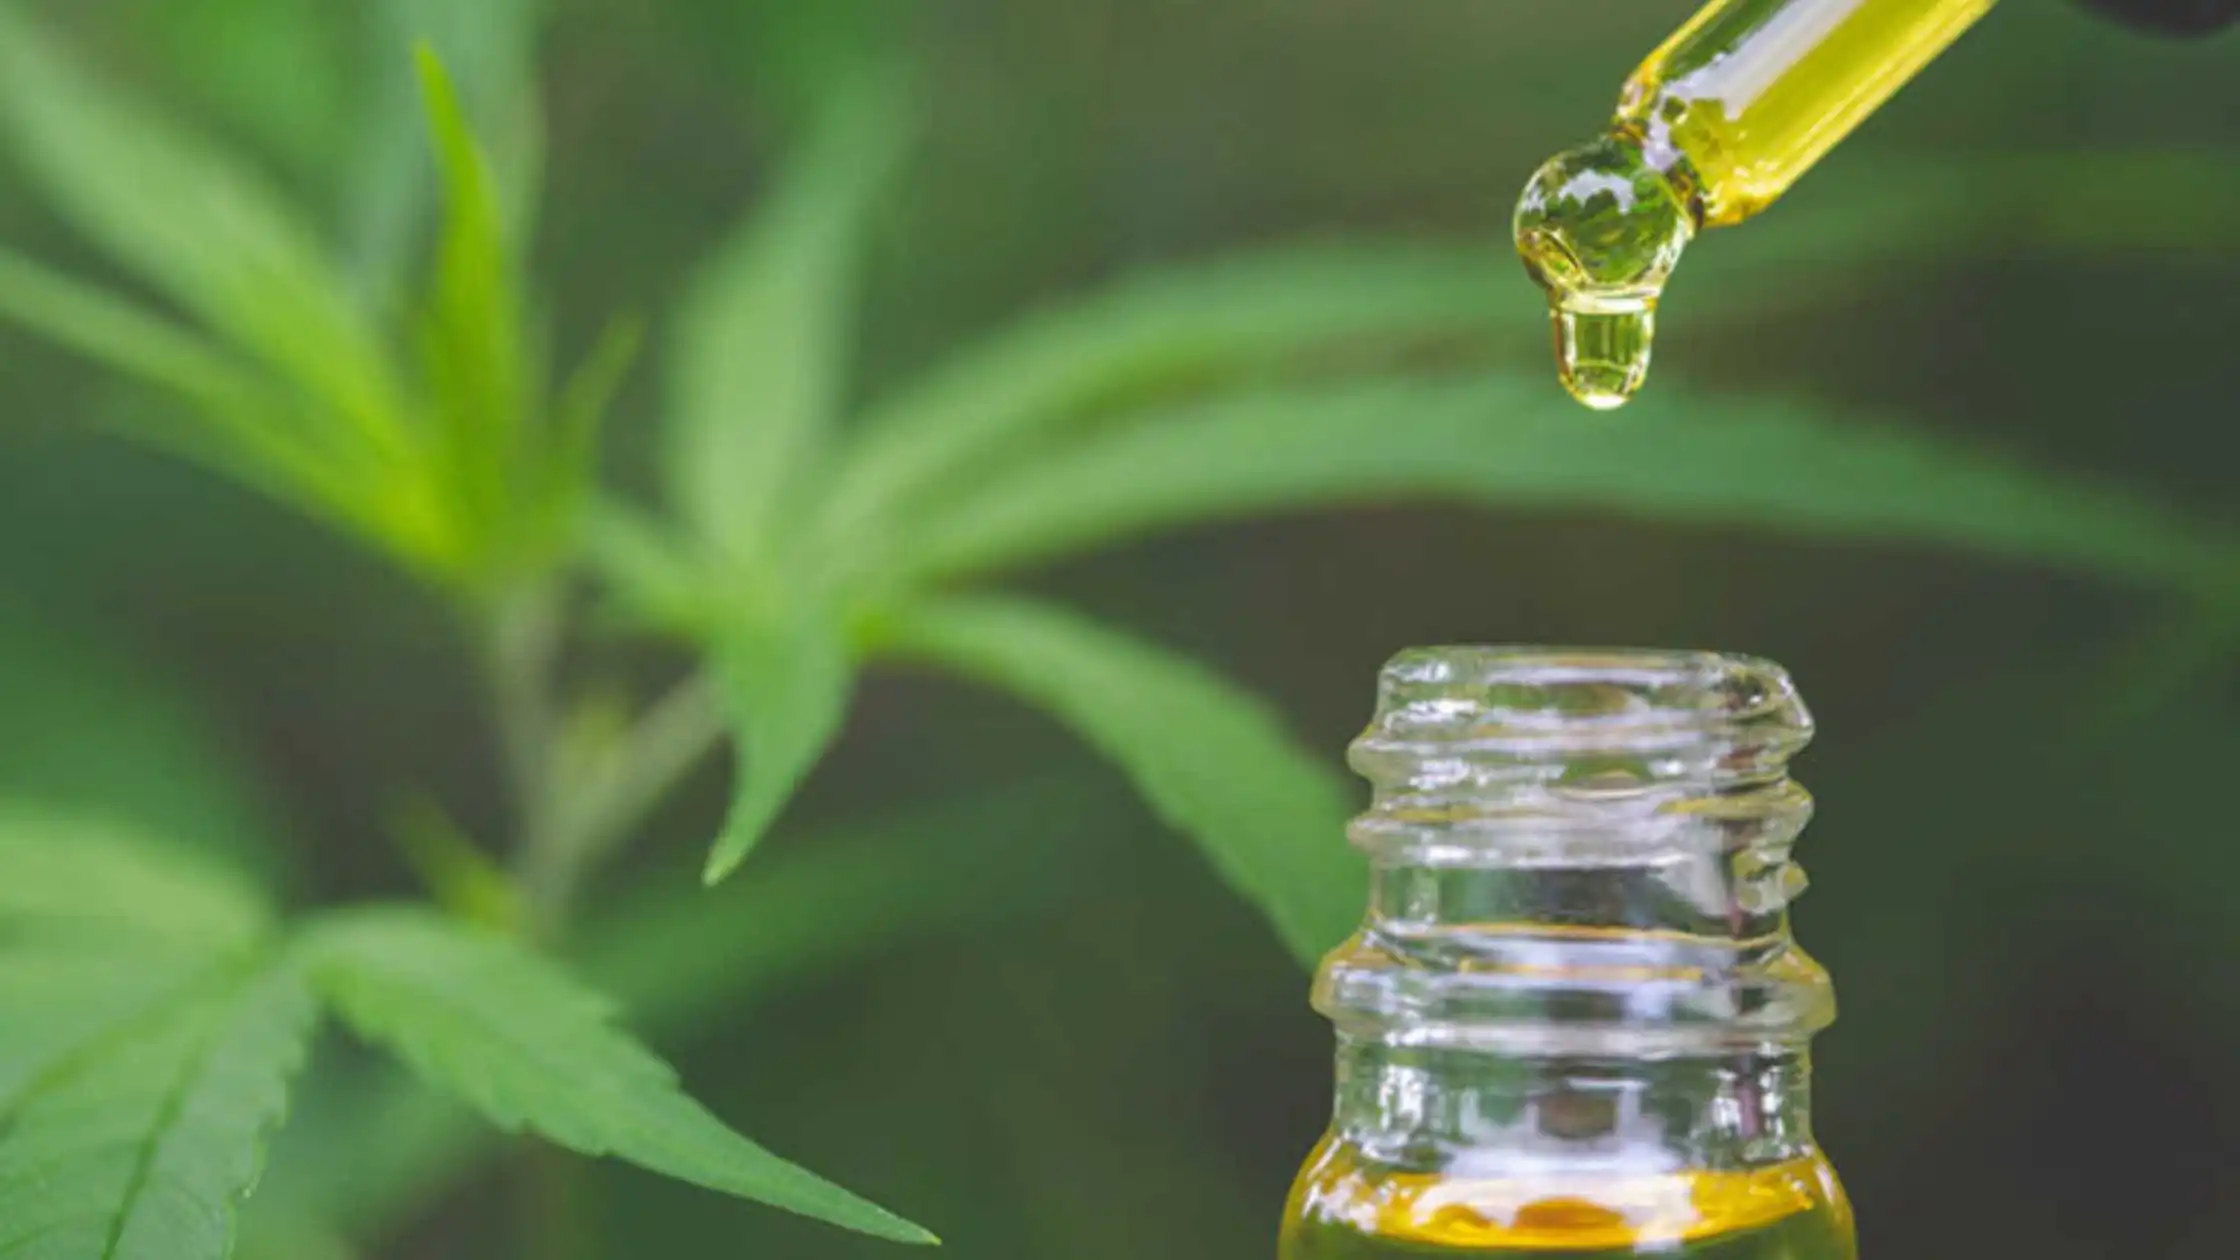 EIHA Claims CBD Research Will Comply to EU Food Safety Regulations